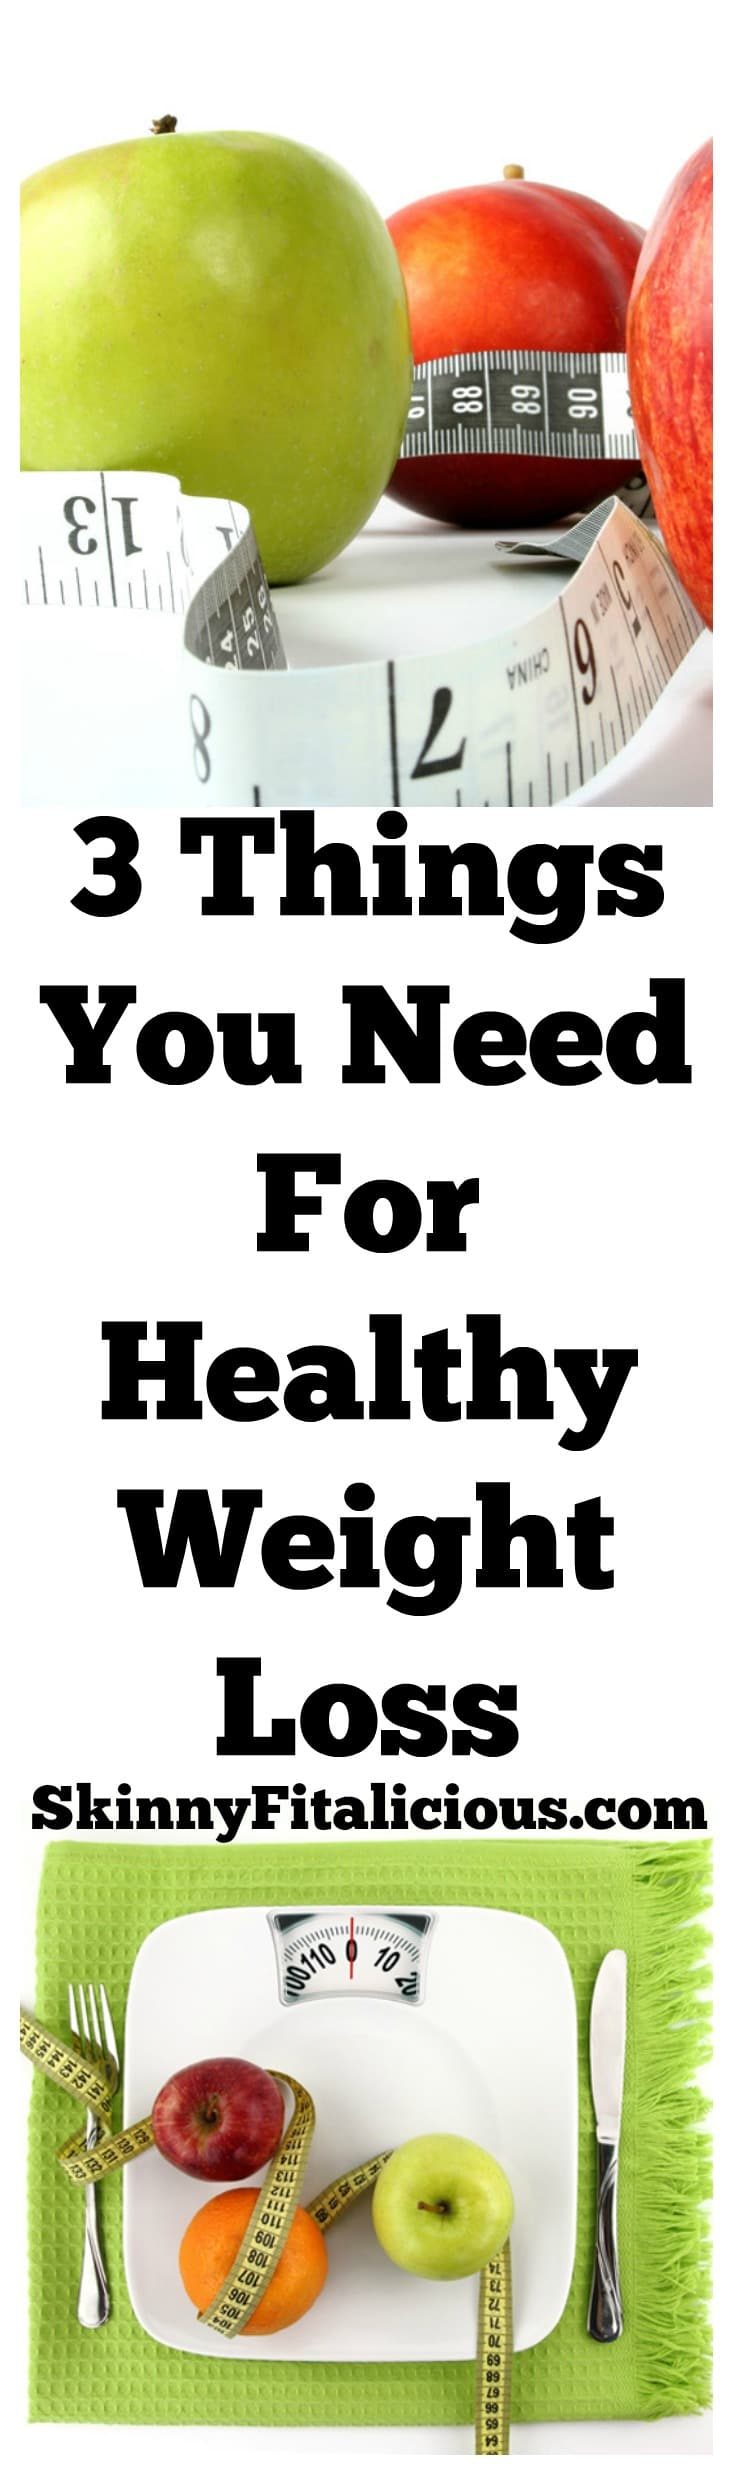 Today I'm sharing 3 Things You Need For Healthy Weight Loss. Three very important things. Before I share them, here's why they're important.